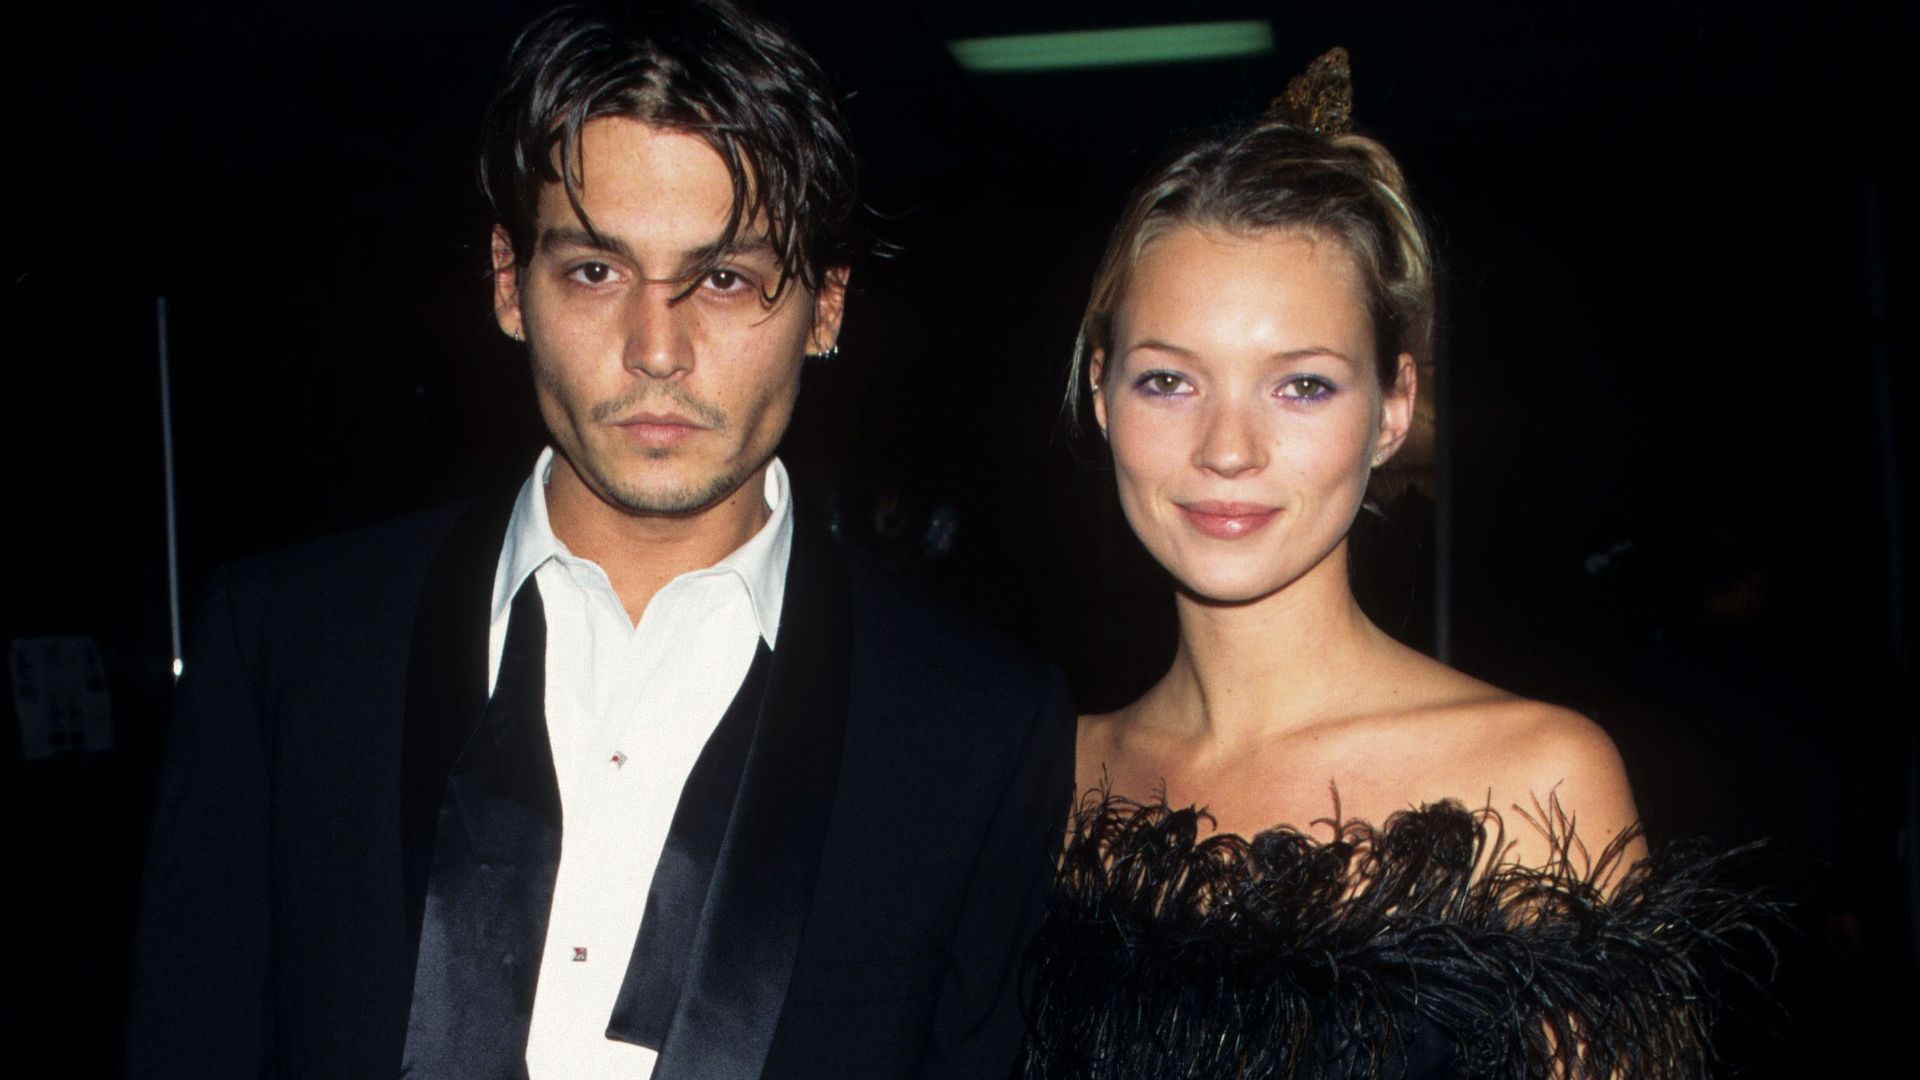 'I hope people will share these with their friends' Kate Moss is selling her 'Love Letters' and we can’t wait to read them